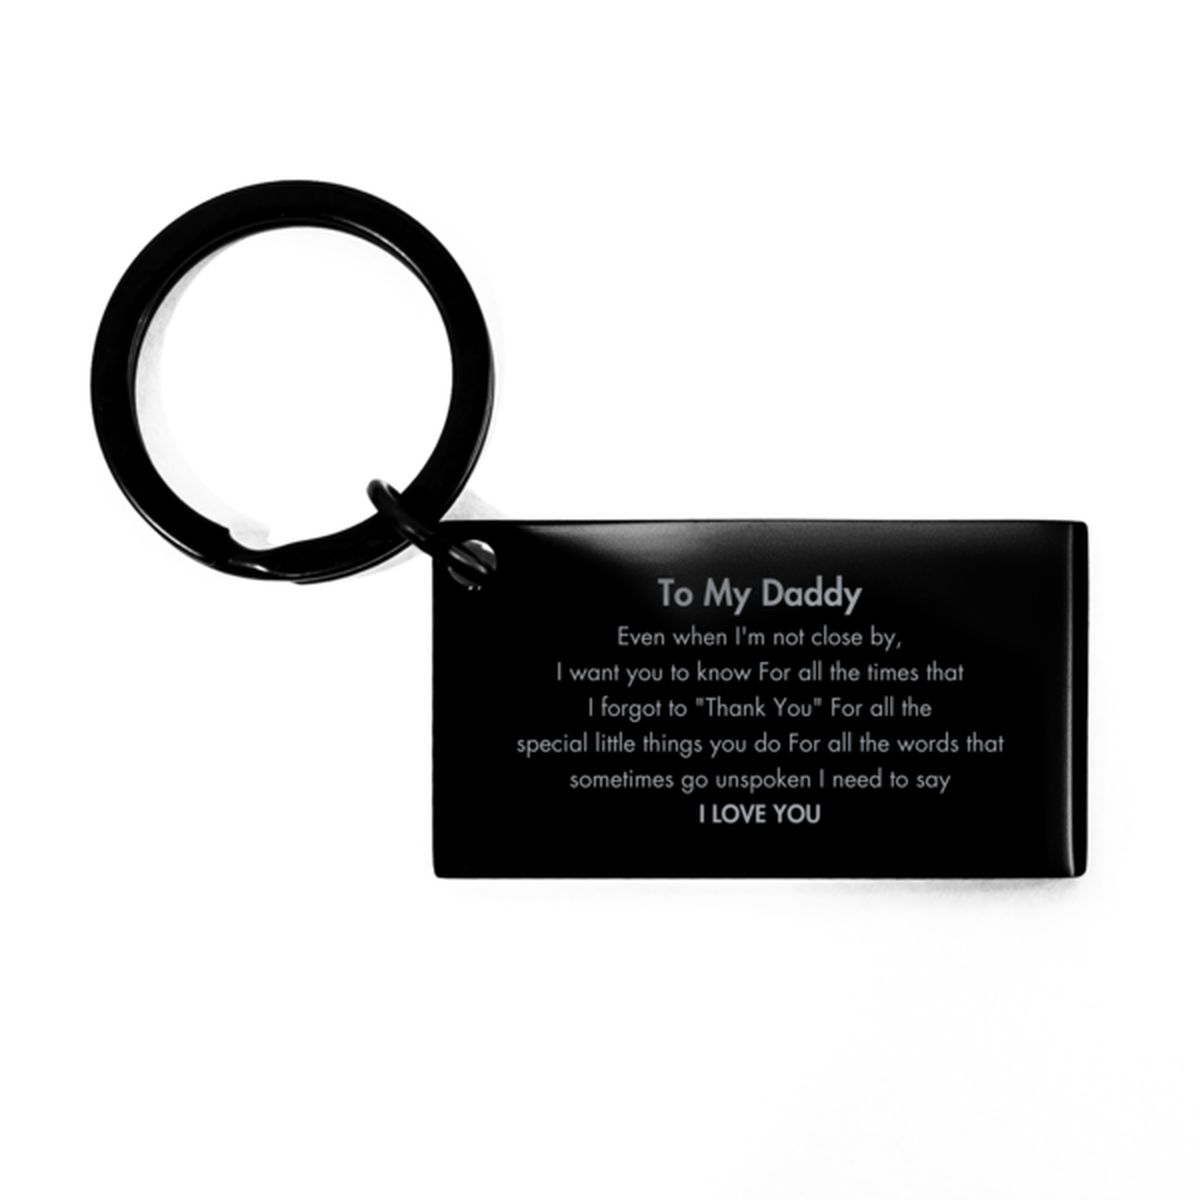 Thank You Gifts for Daddy, Keepsake Keychain Gifts for Daddy Birthday Mother's day Father's Day Daddy For all the words That sometimes go unspoken I need to say I LOVE YOU